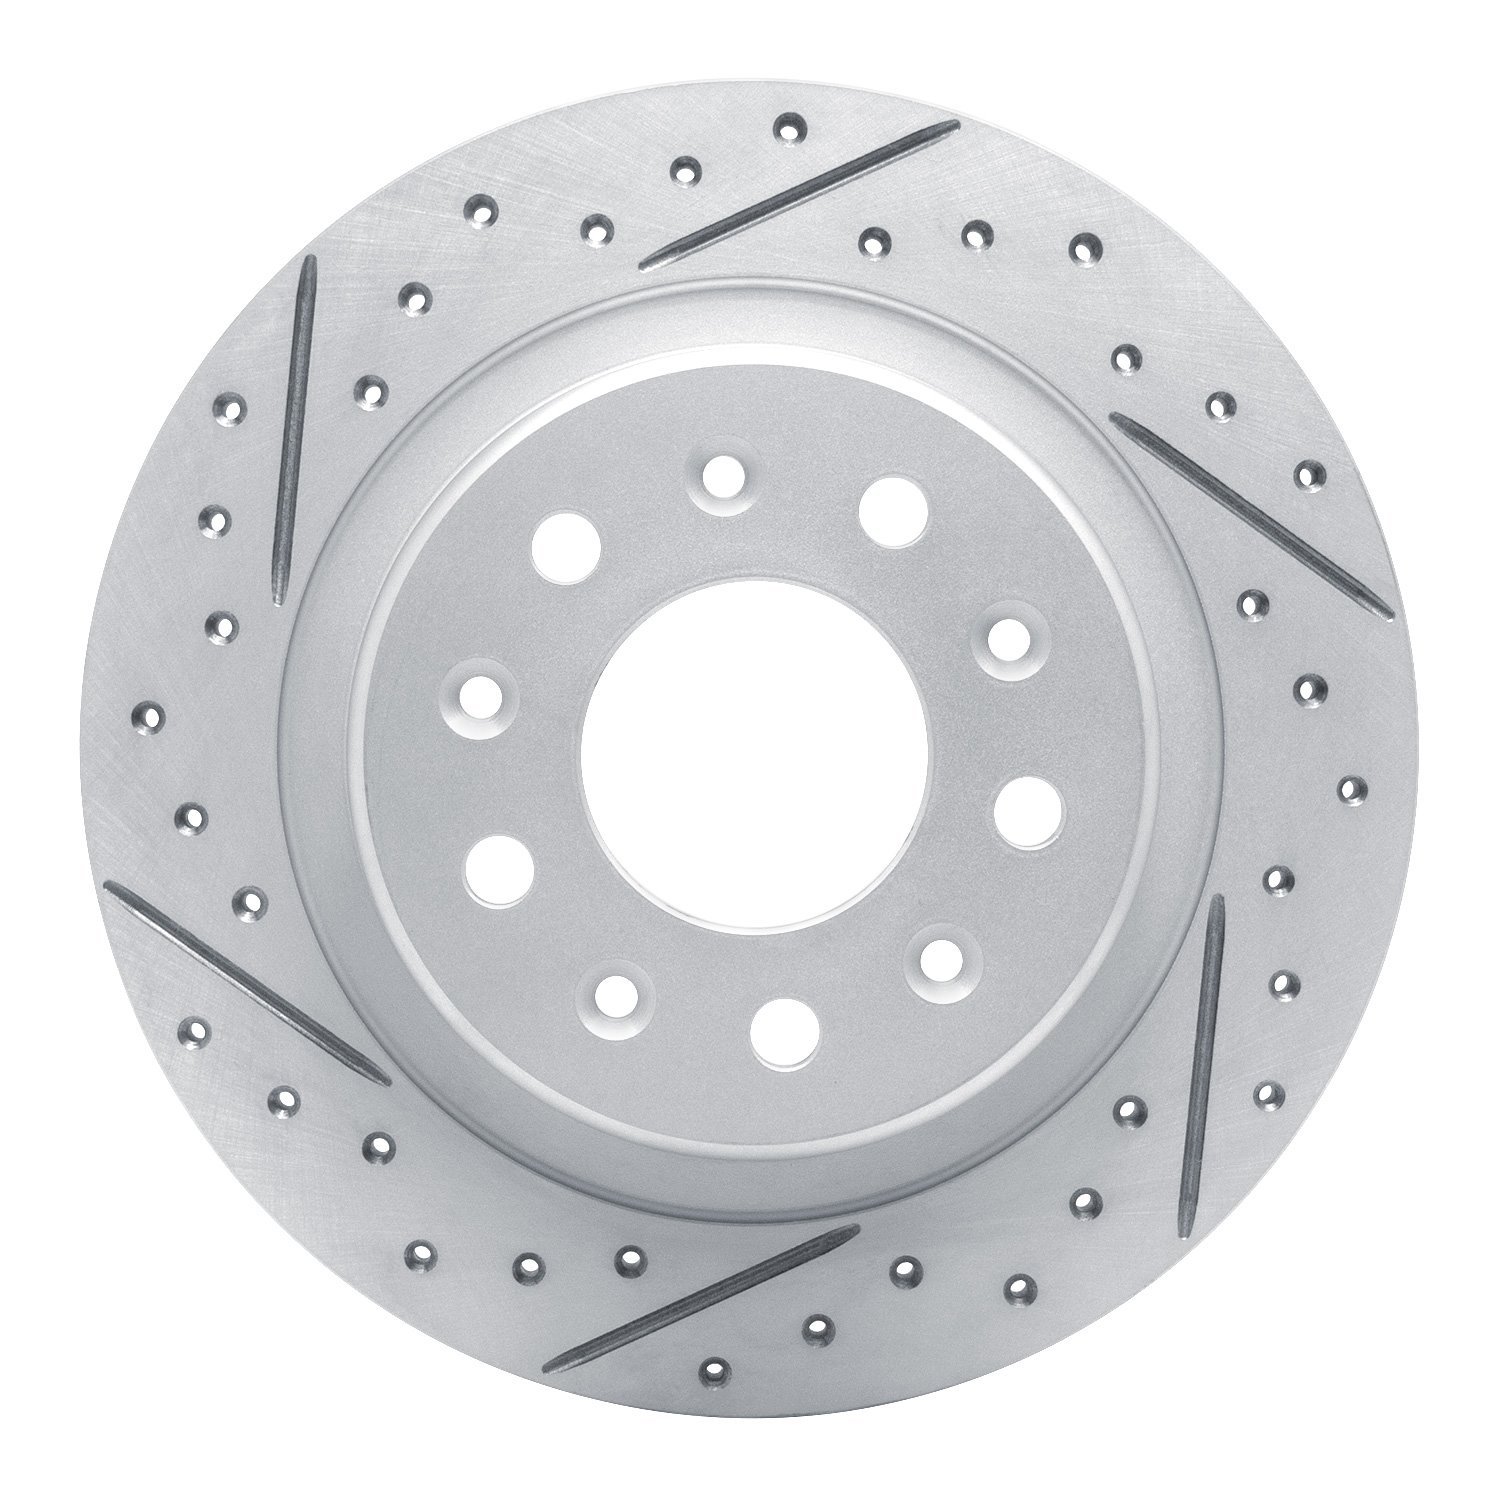 830-47075L Geoperformance Drilled/Slotted Brake Rotor, Fits Select GM, Position: Rear Left